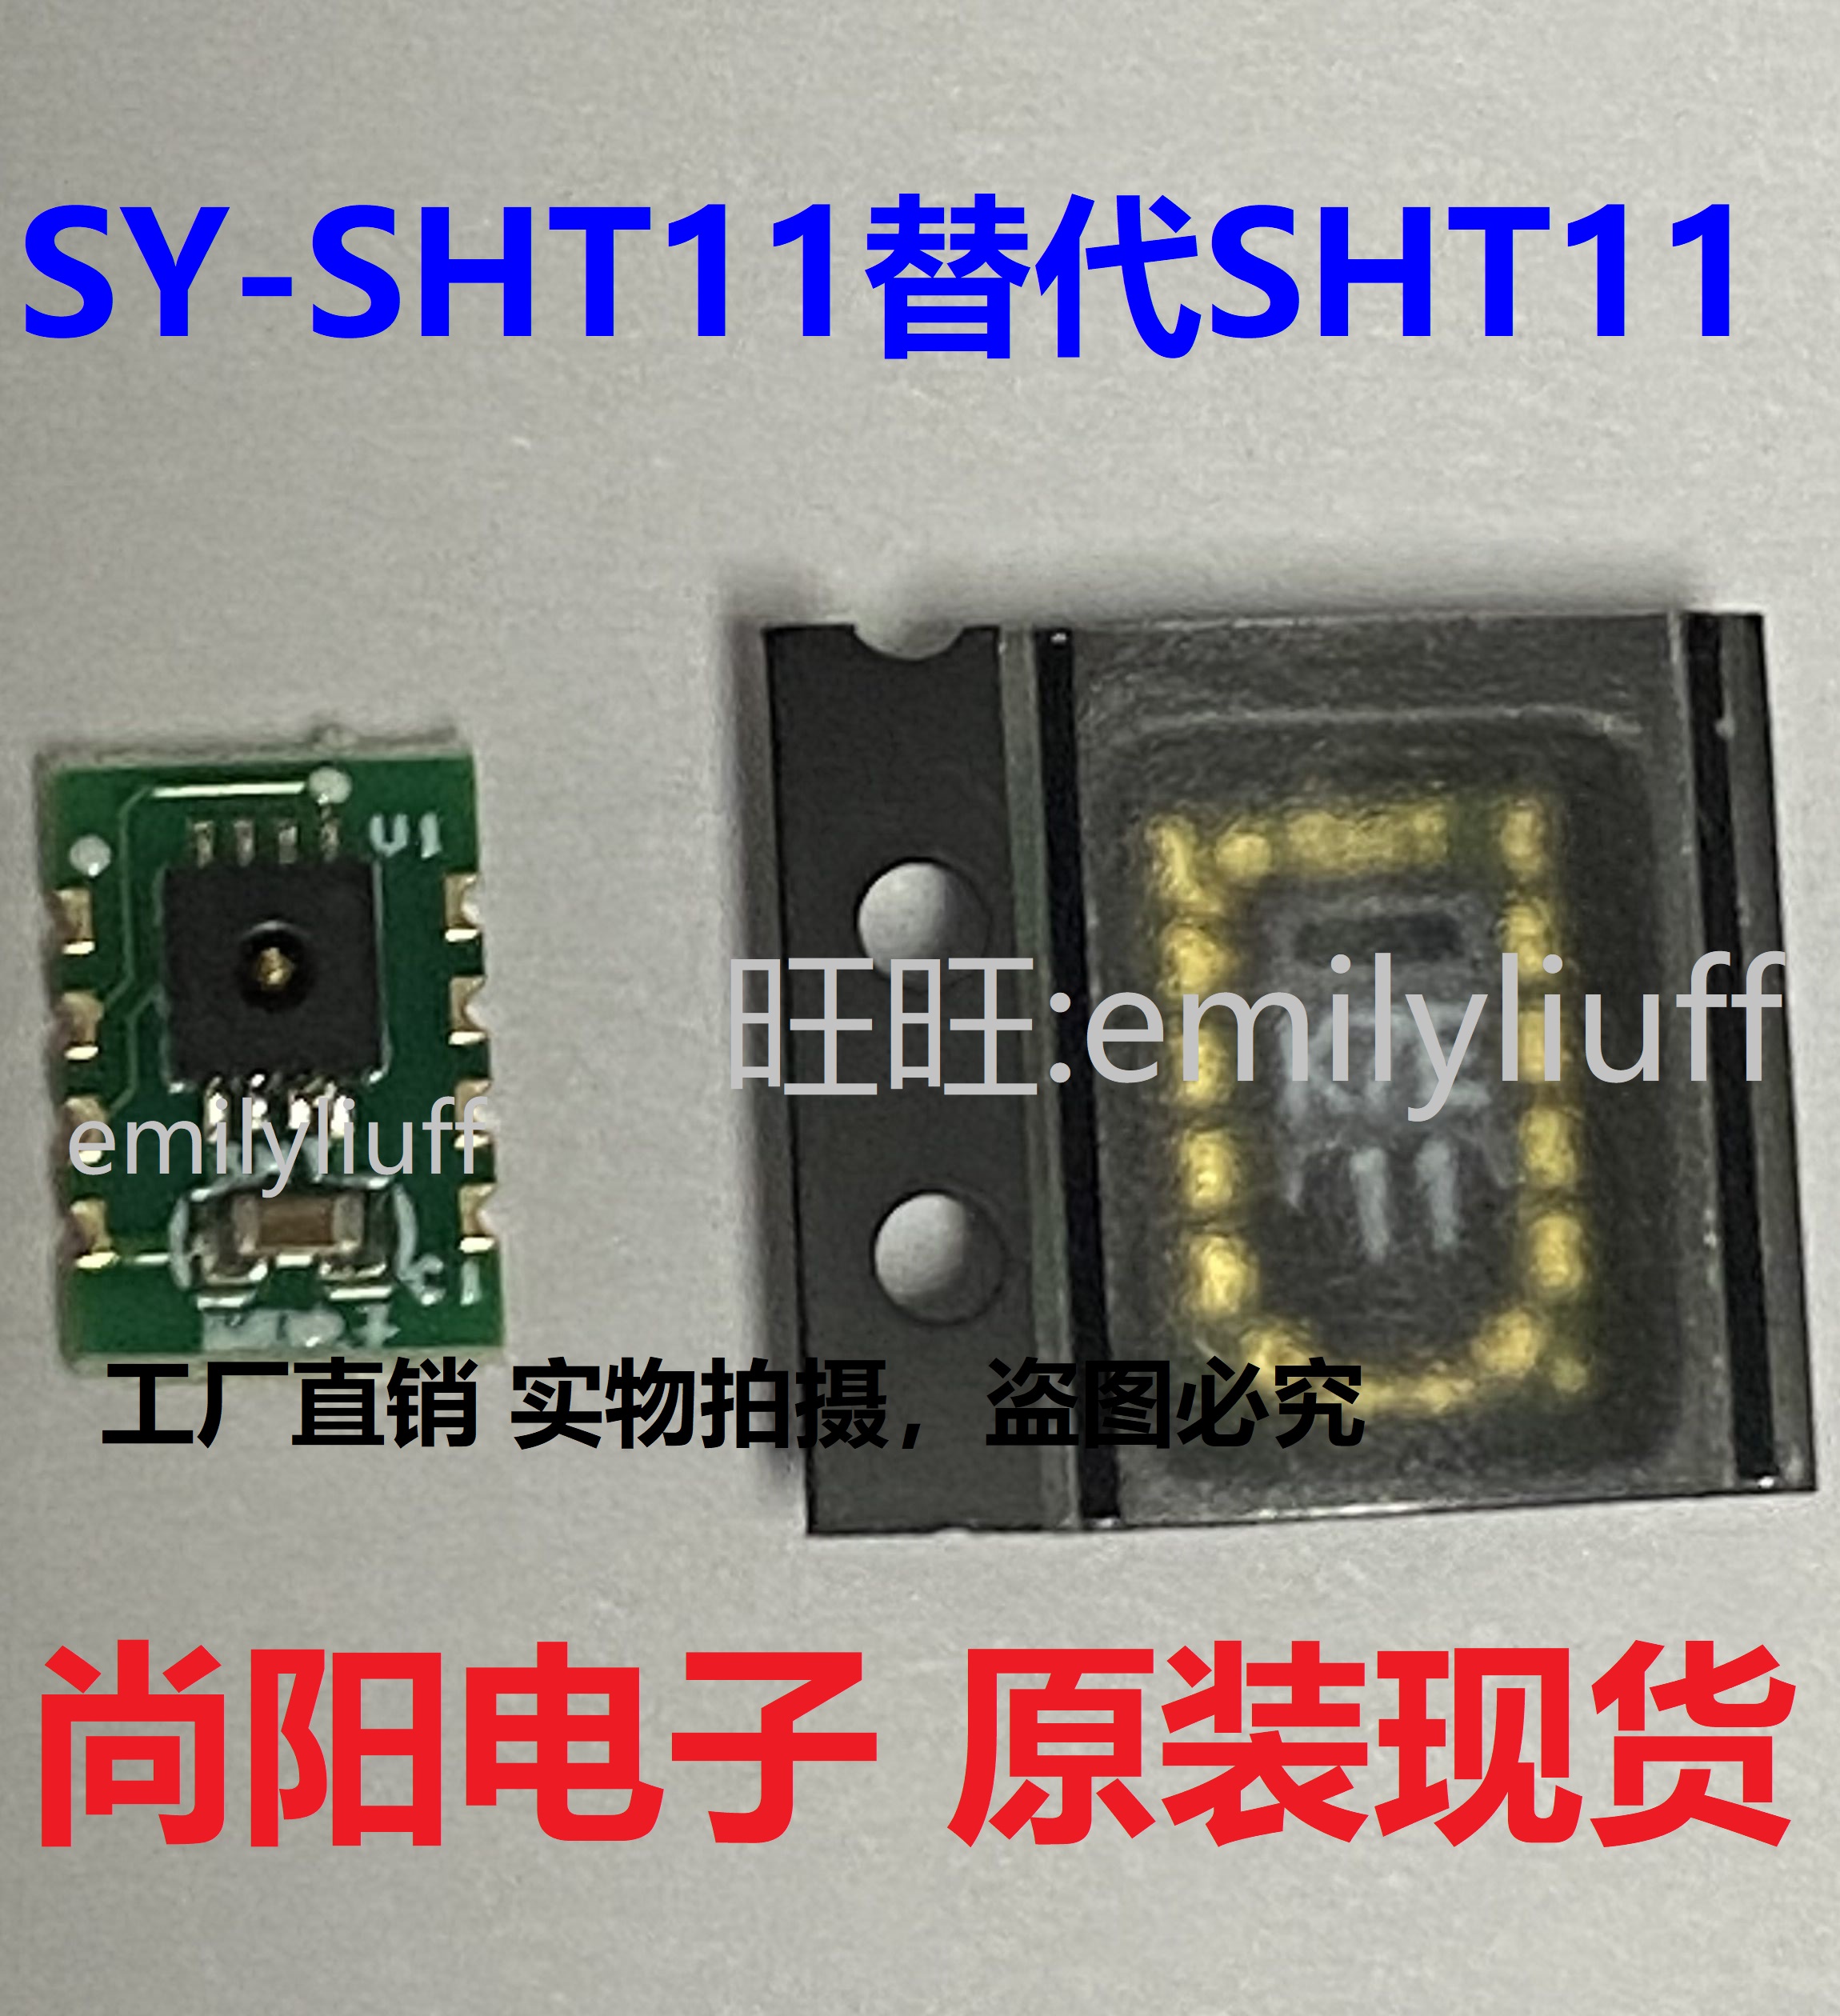 Replacement Of Sy-sht11SHT10 / SHT11 / SHT15 Temperature and humidity sensor for use SY-SHT10 / 11 / 15 provide technology support